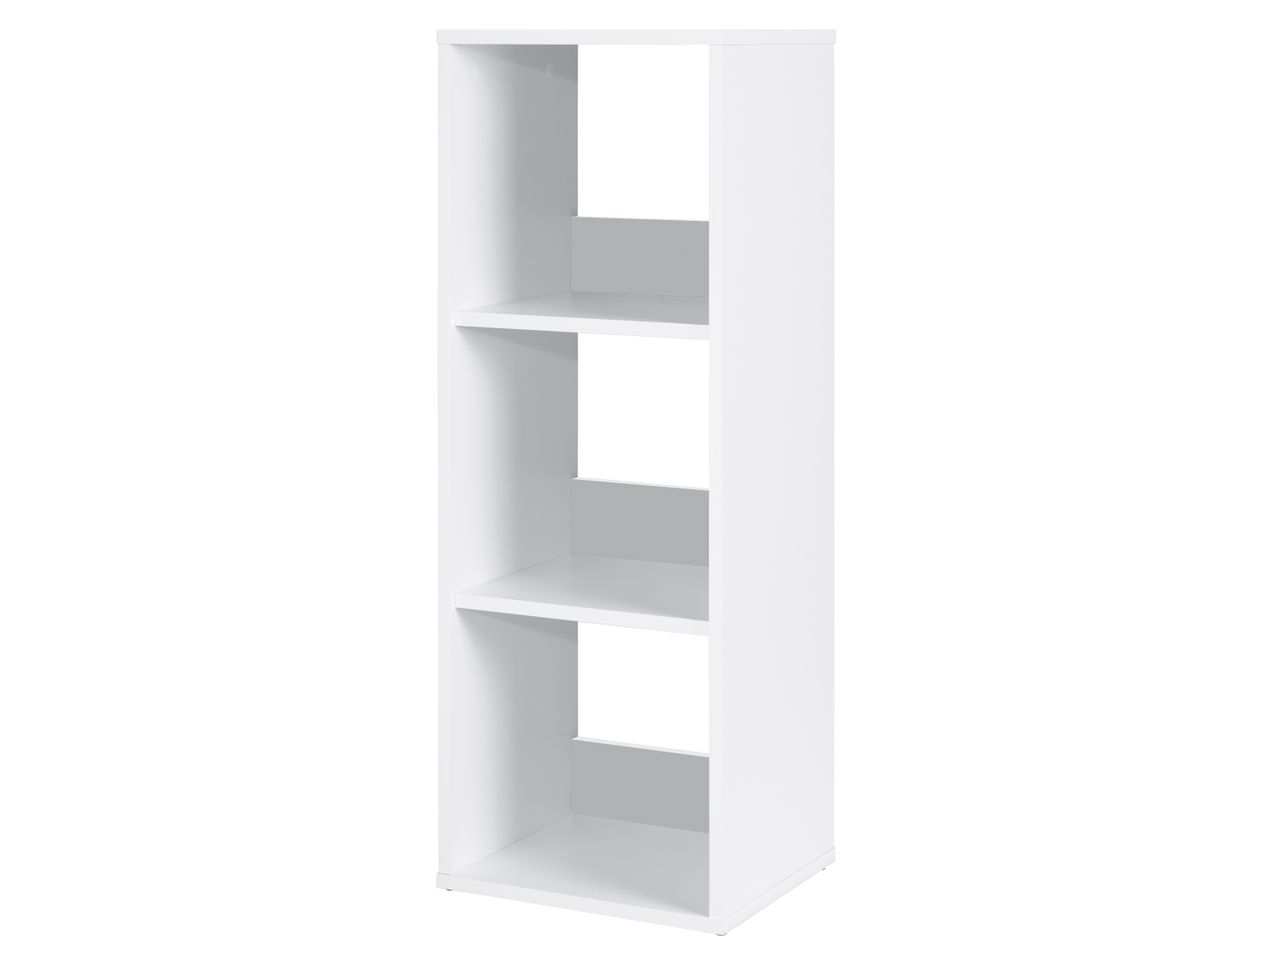 Go to full screen view: Shelving Unit with 3 compartments - Image 2